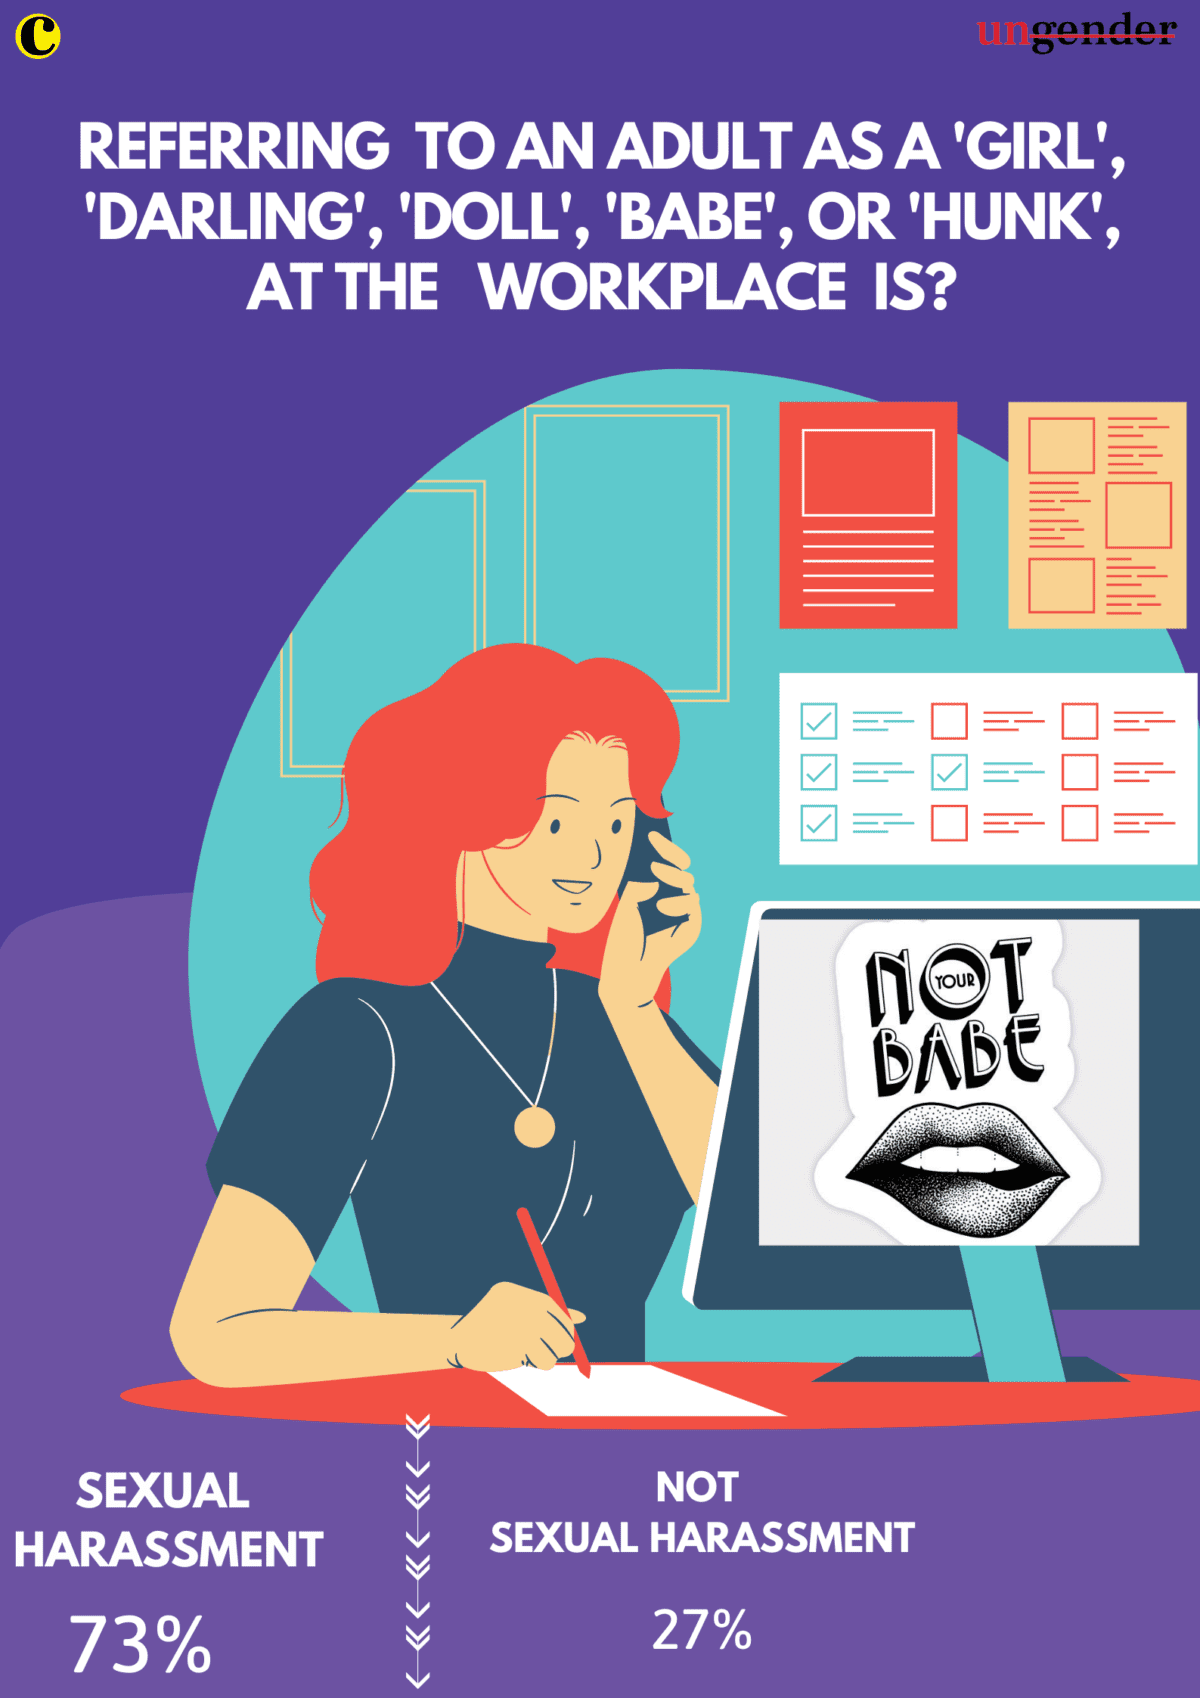 What Constitutes Sexual Harassment At Workplace?